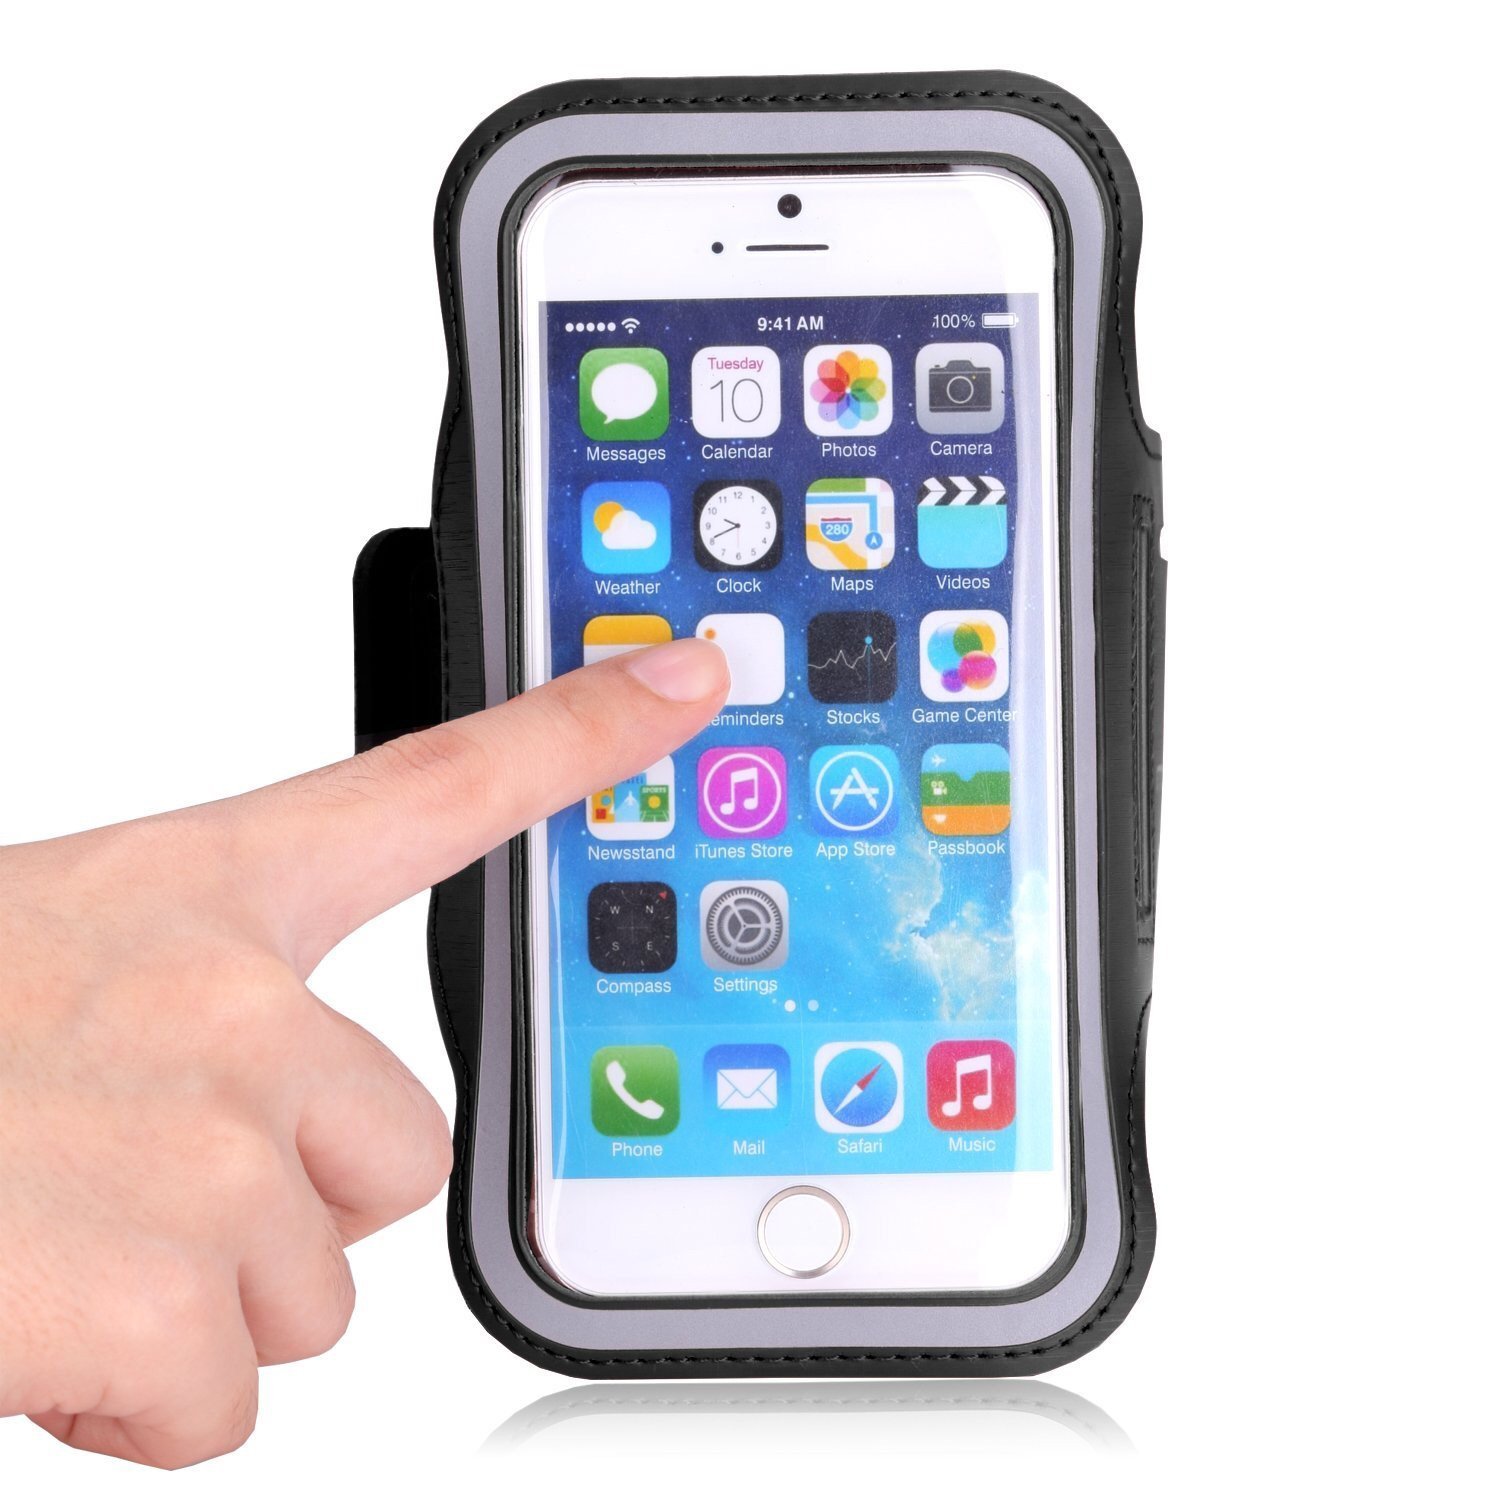 Universal-Sports-Elastic-Armband-Sweatproof-Touch-Screen-Mobile-Phone-Arm-Bags-with-Earphone-Port-fo-1890485-2